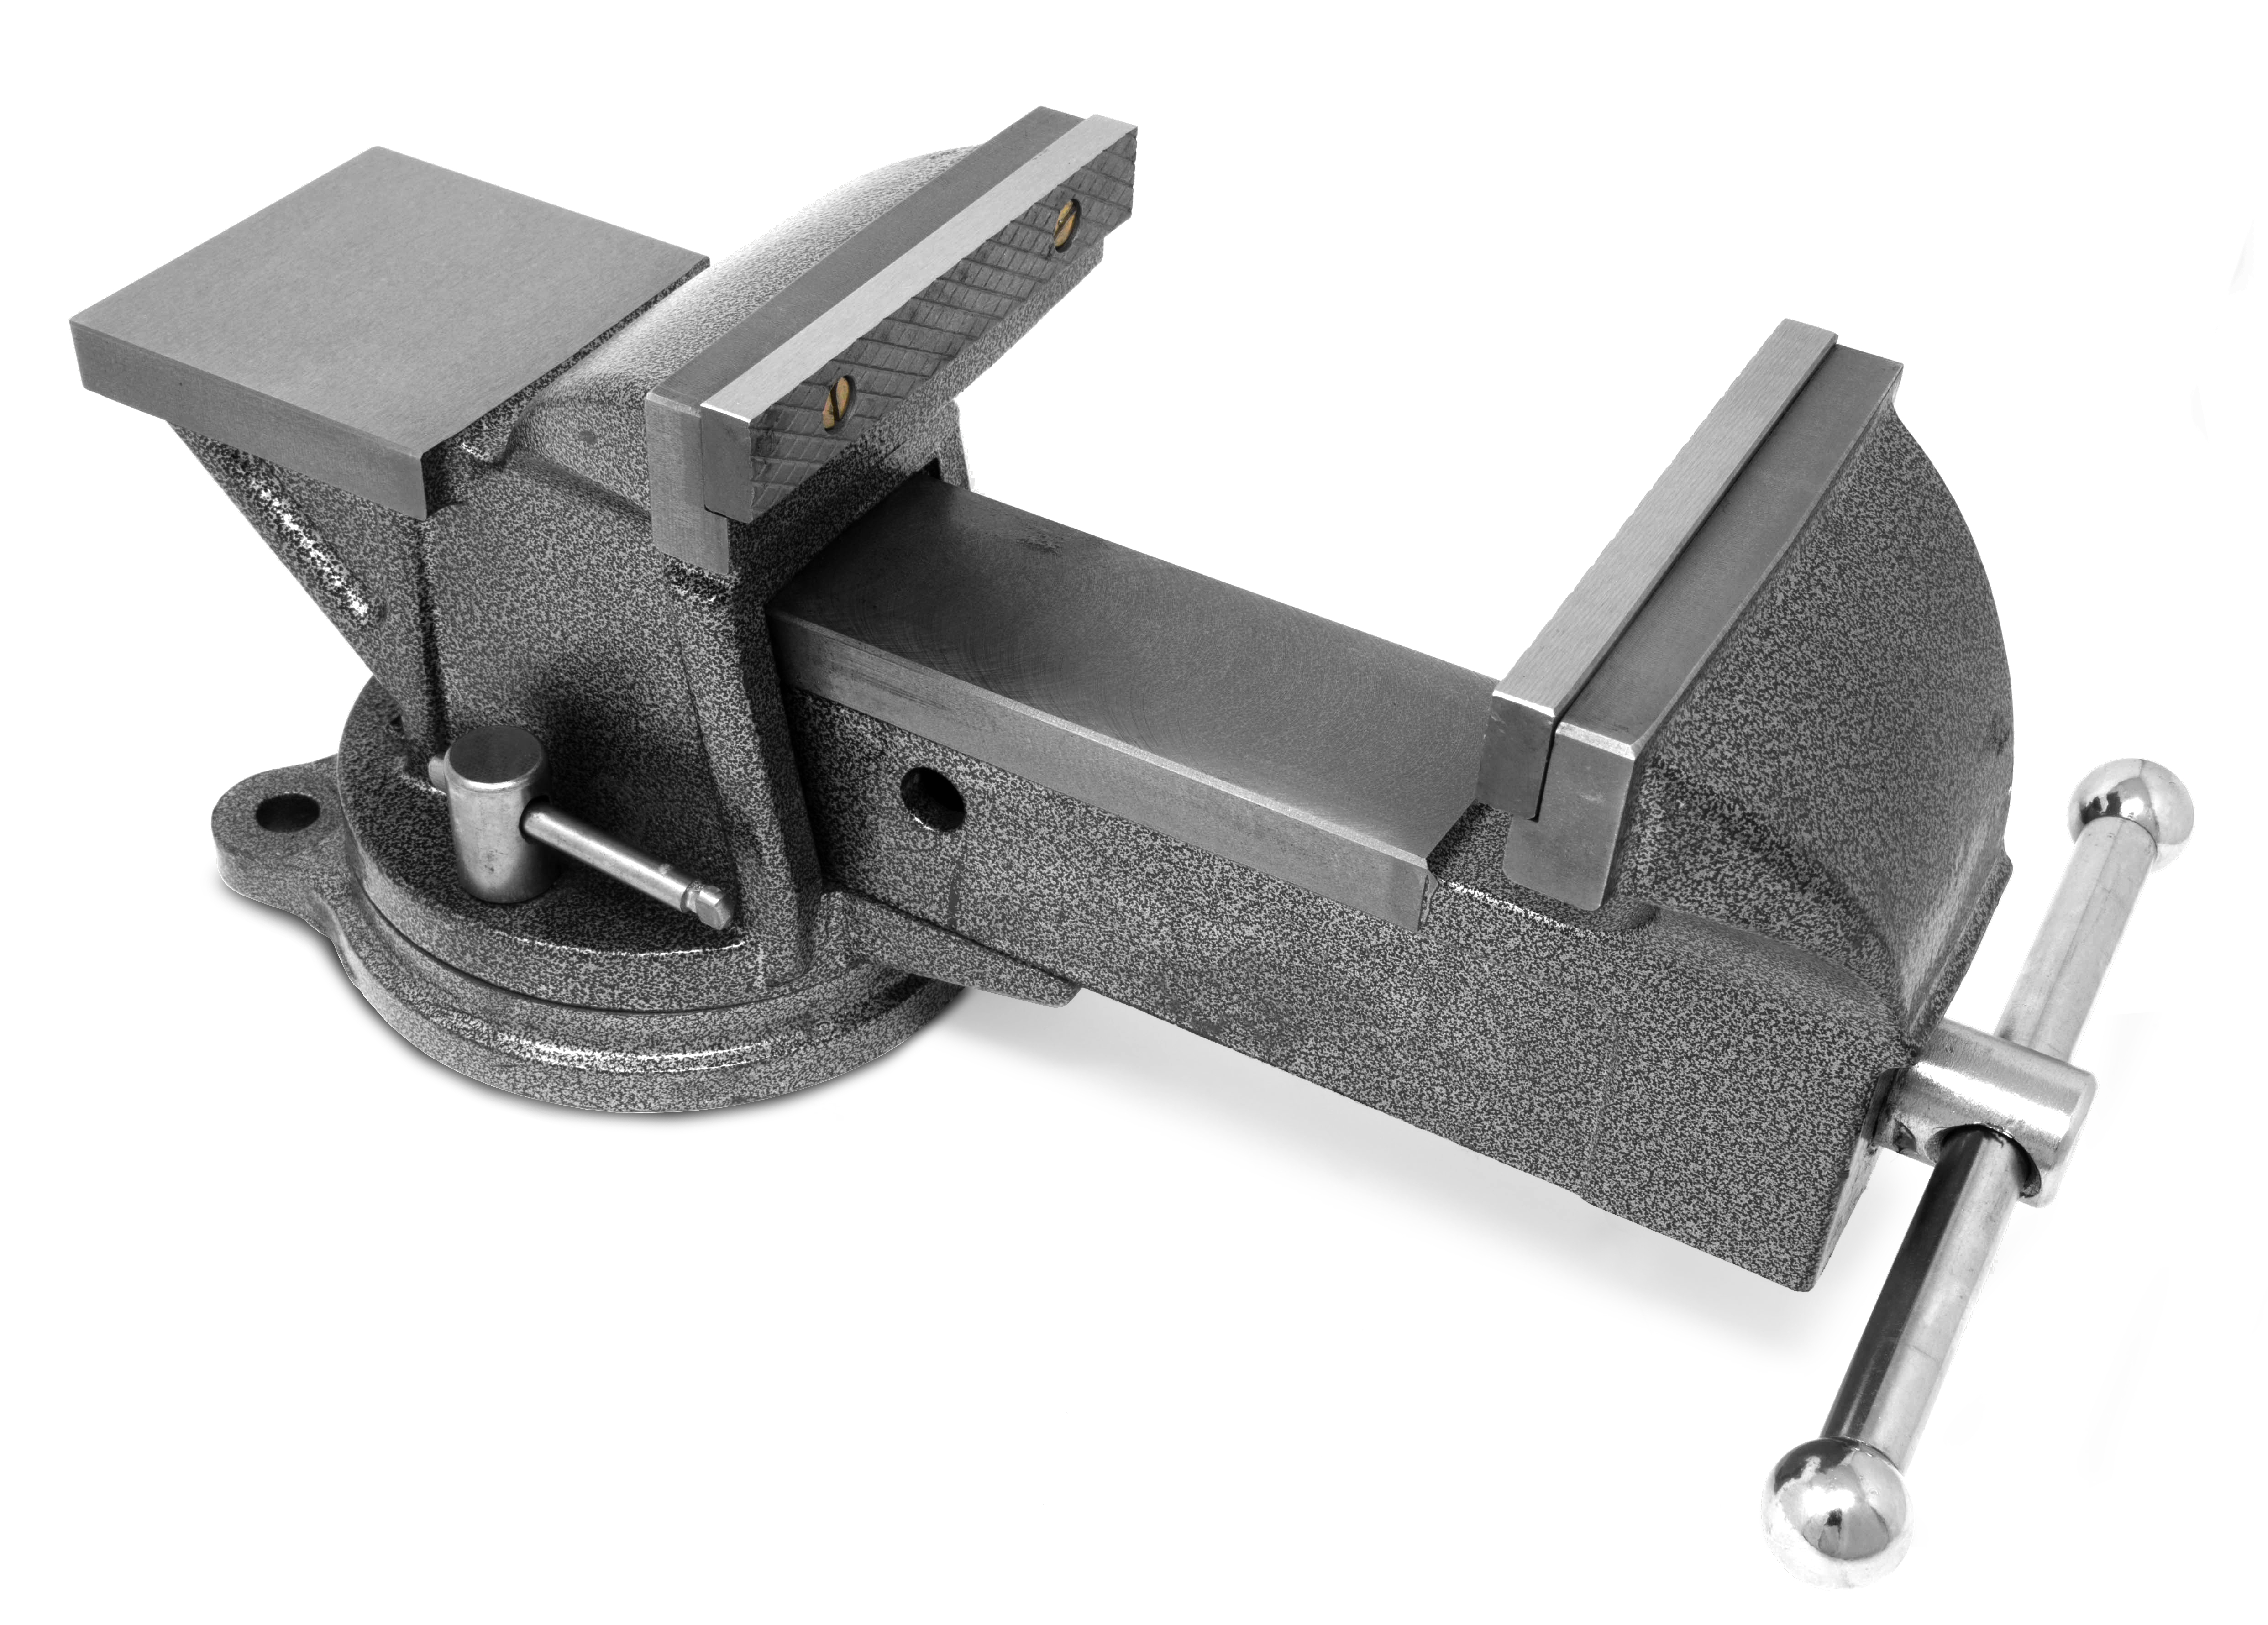 WEN Products 5-Inch Heavy Duty Cast Iron Bench Vise with Swivel Base - image 2 of 4